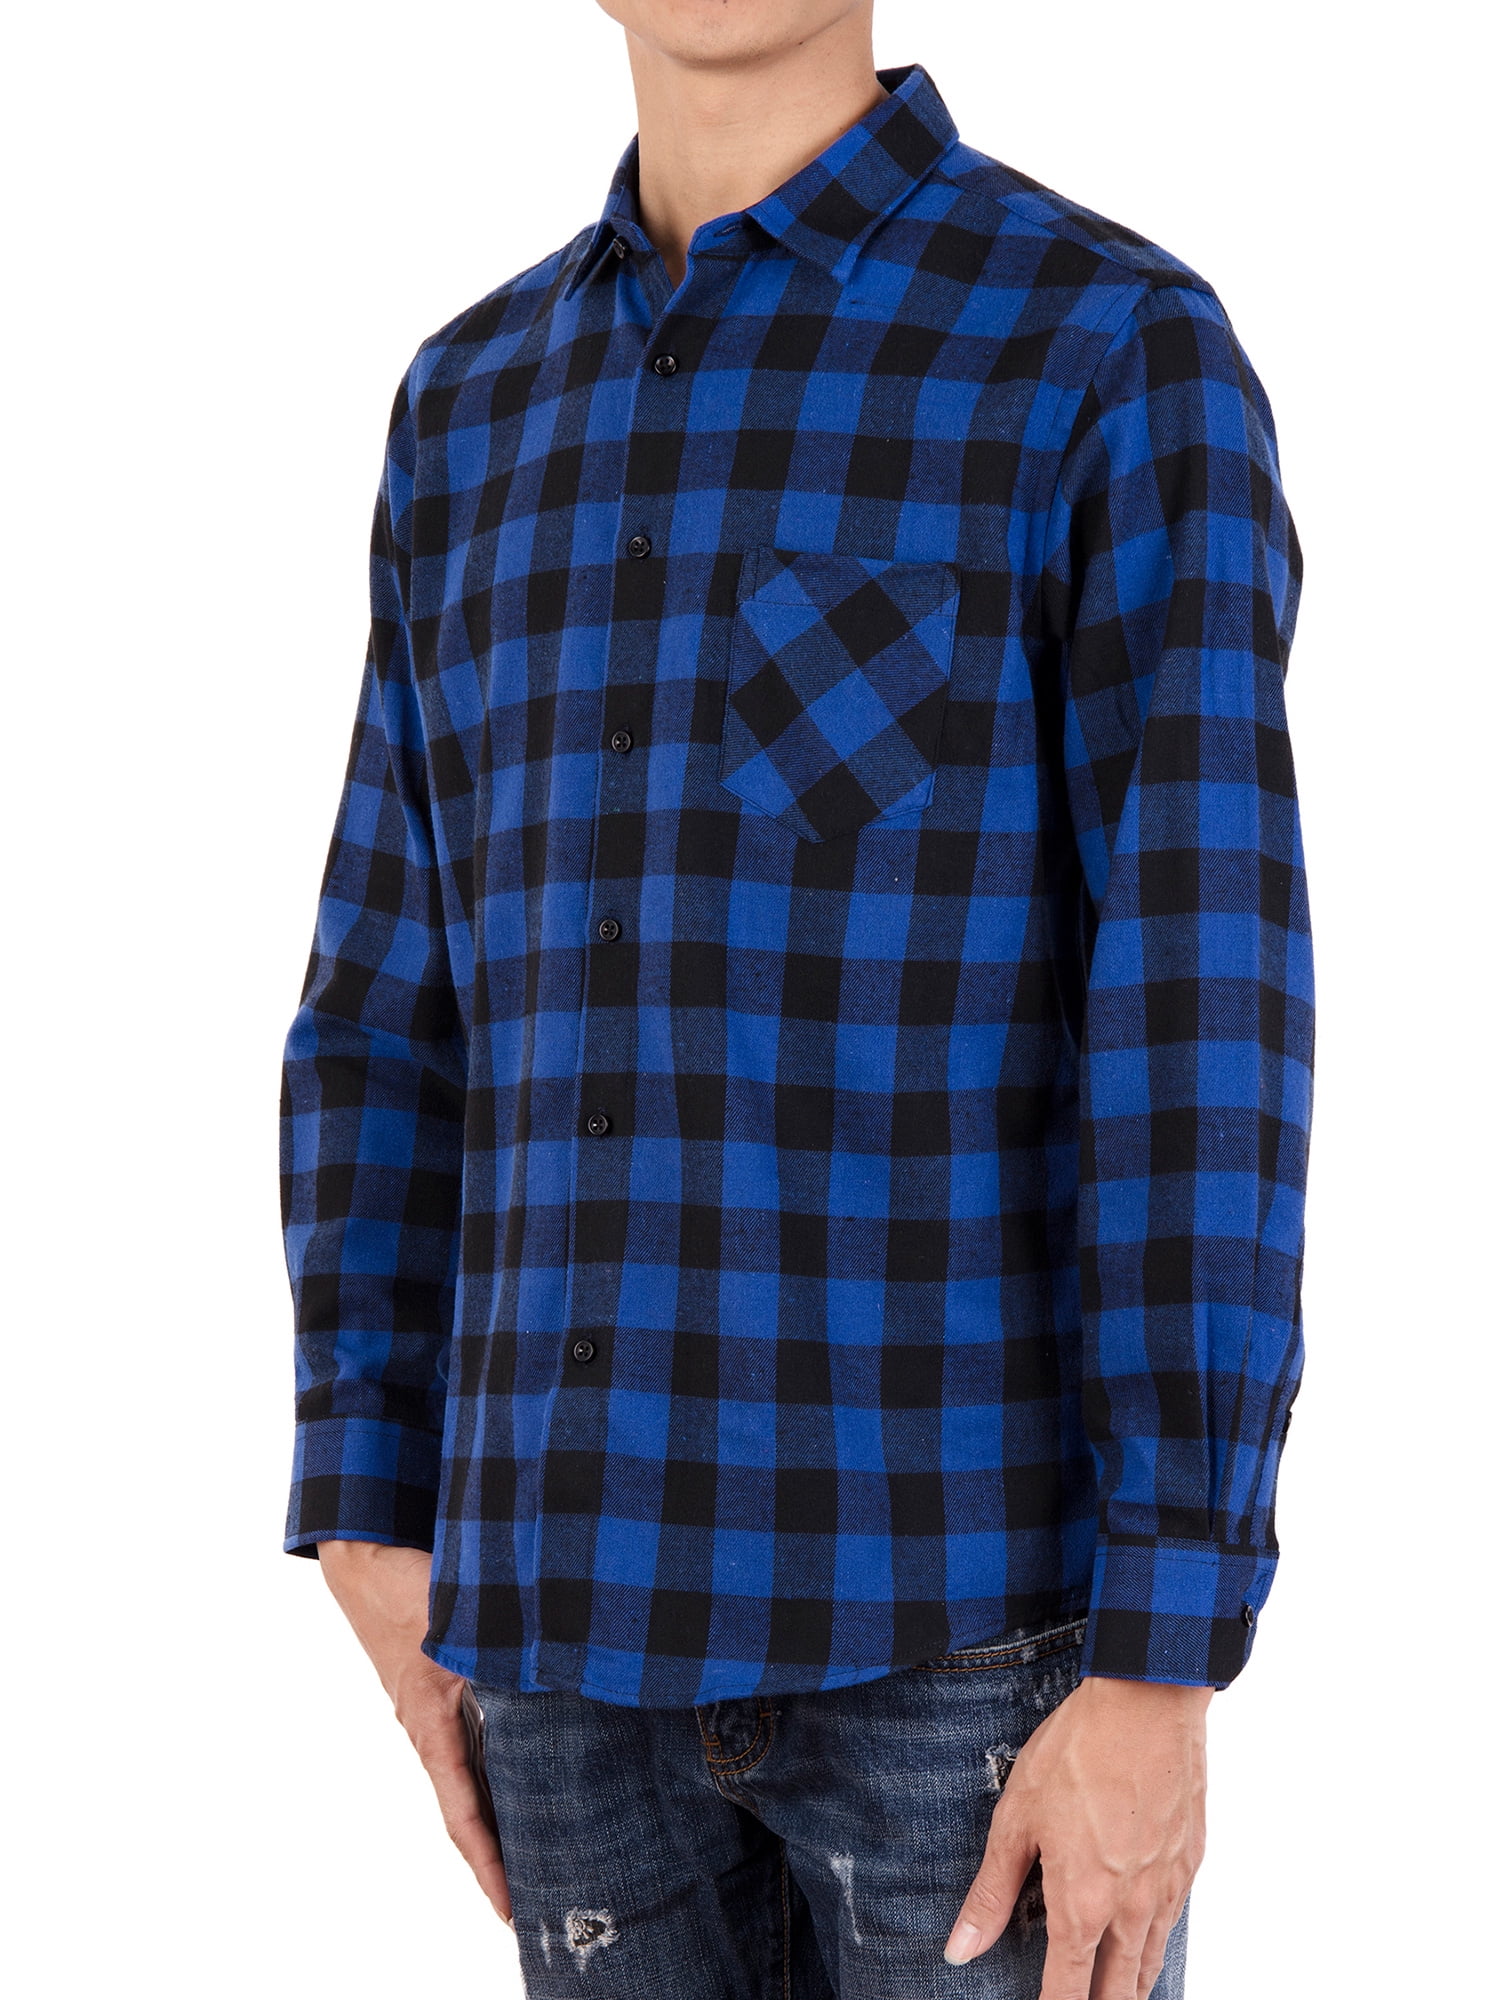 Fubotevic Mens Long Sleeve Plaid Print Button Up Casual Contrast Flannel Checkered Shirt 